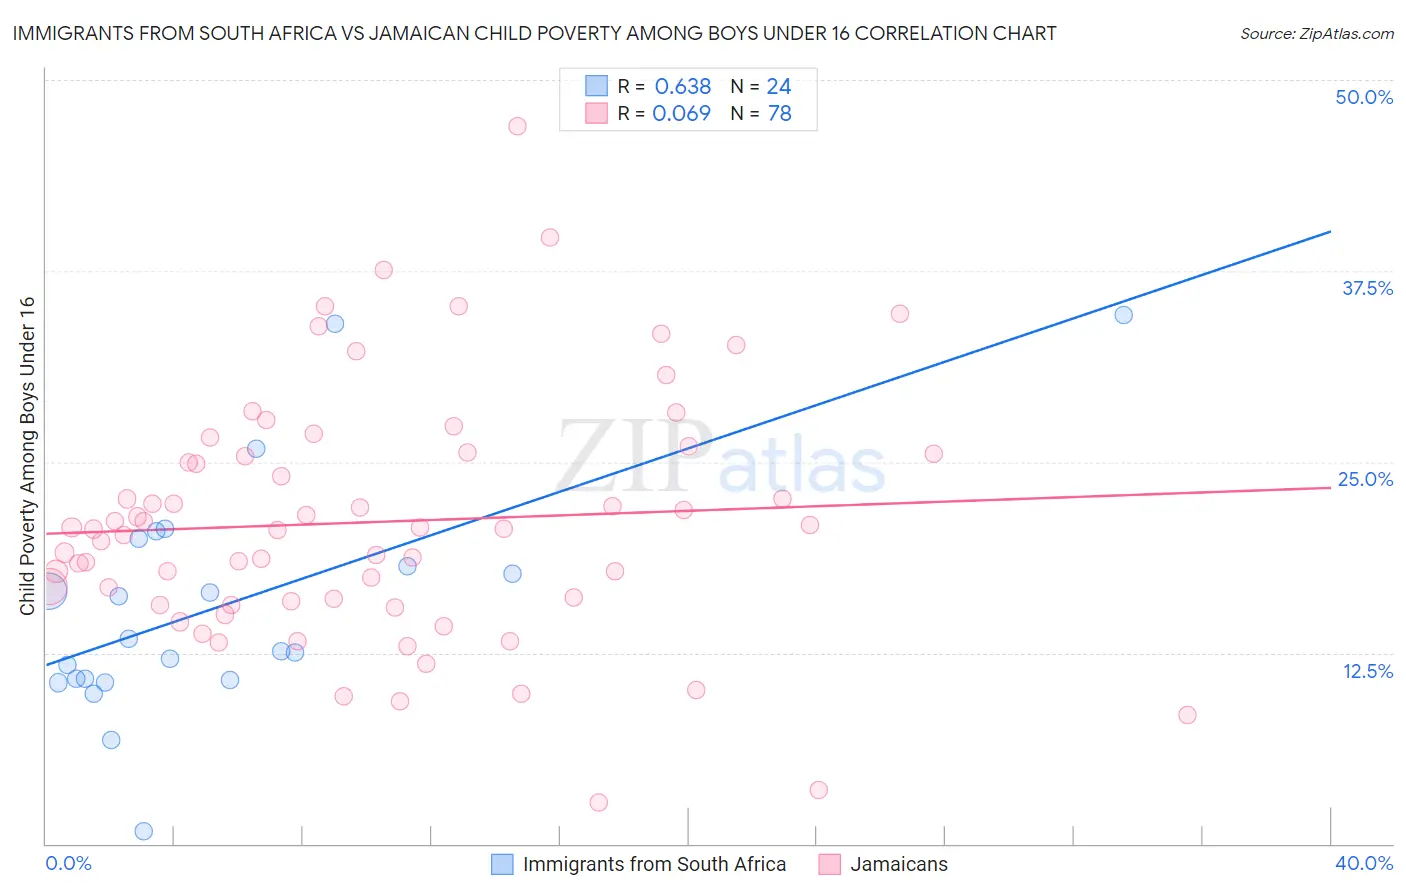 Immigrants from South Africa vs Jamaican Child Poverty Among Boys Under 16